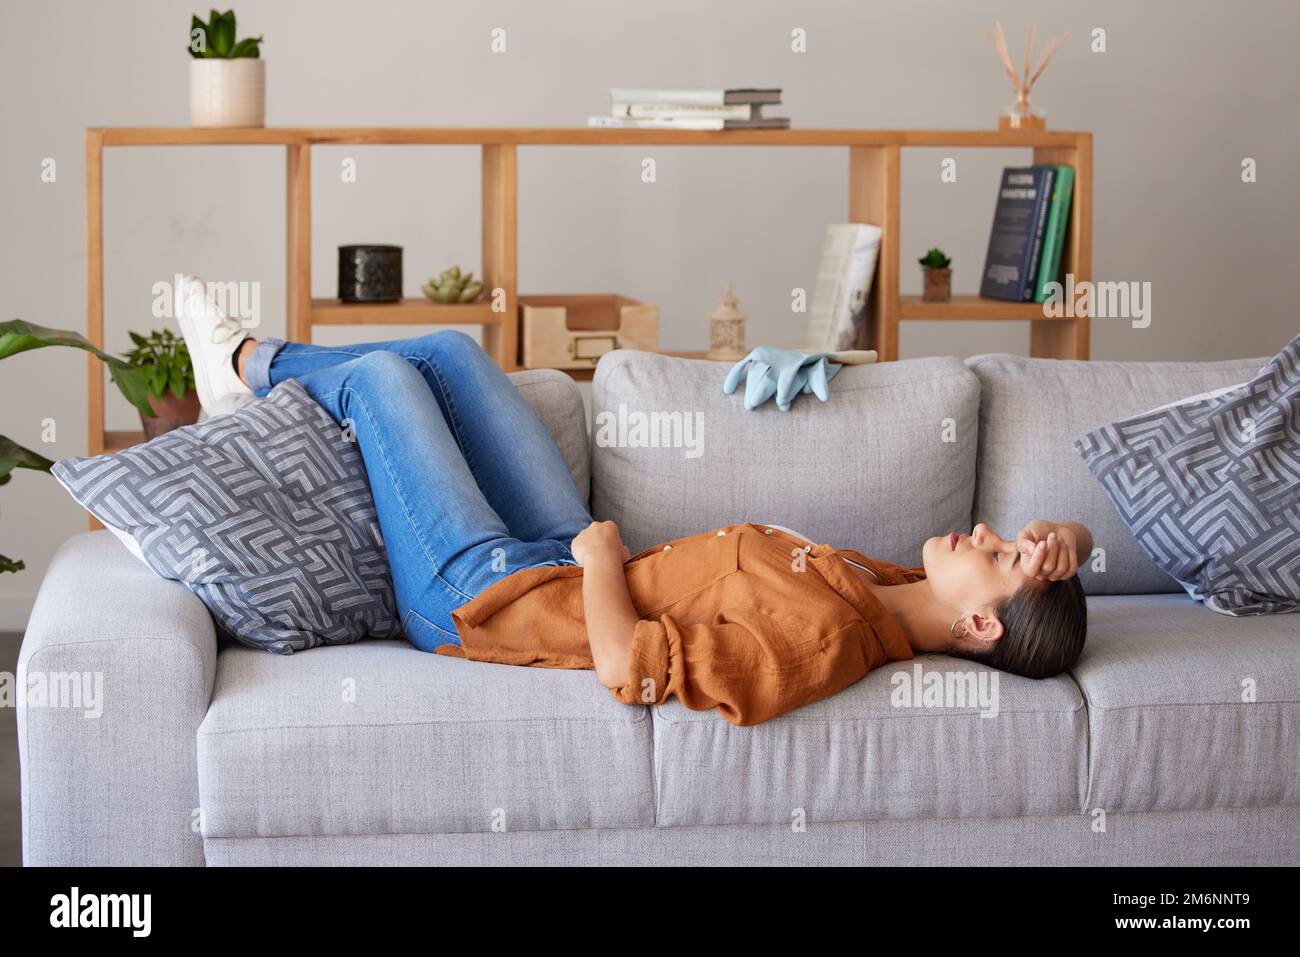 Tired cleaner woman, sleep and sofa to relax for fatigue, wellness and mental health after cleaning house. Hygiene expert, burnout and sleeping on Stock Photo